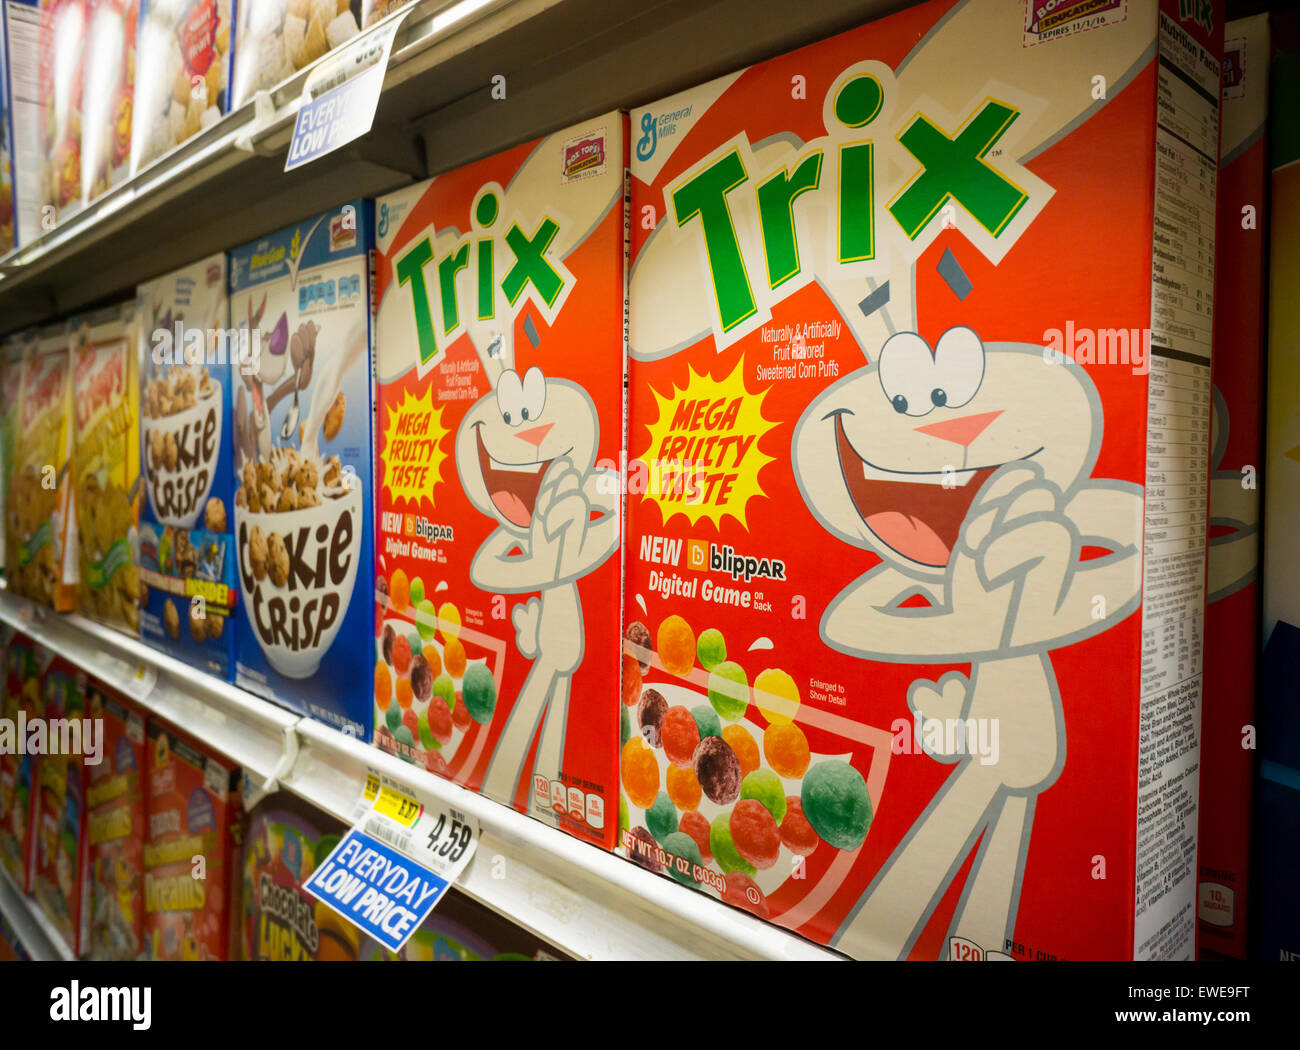 Boxes of General Mills breakfast cereals including Trix displayed on supermarket shelves in New York on Tuesday, June 23, 2015. General Mills announced that it will phase out artificial flavors and colors in its breakfast products by 2017.The company joins a growing list of food manufacturers removing artificial ingredients in a move to satisfy consumers' demands for 'natural'. (© Richard B. Levine) Stock Photo